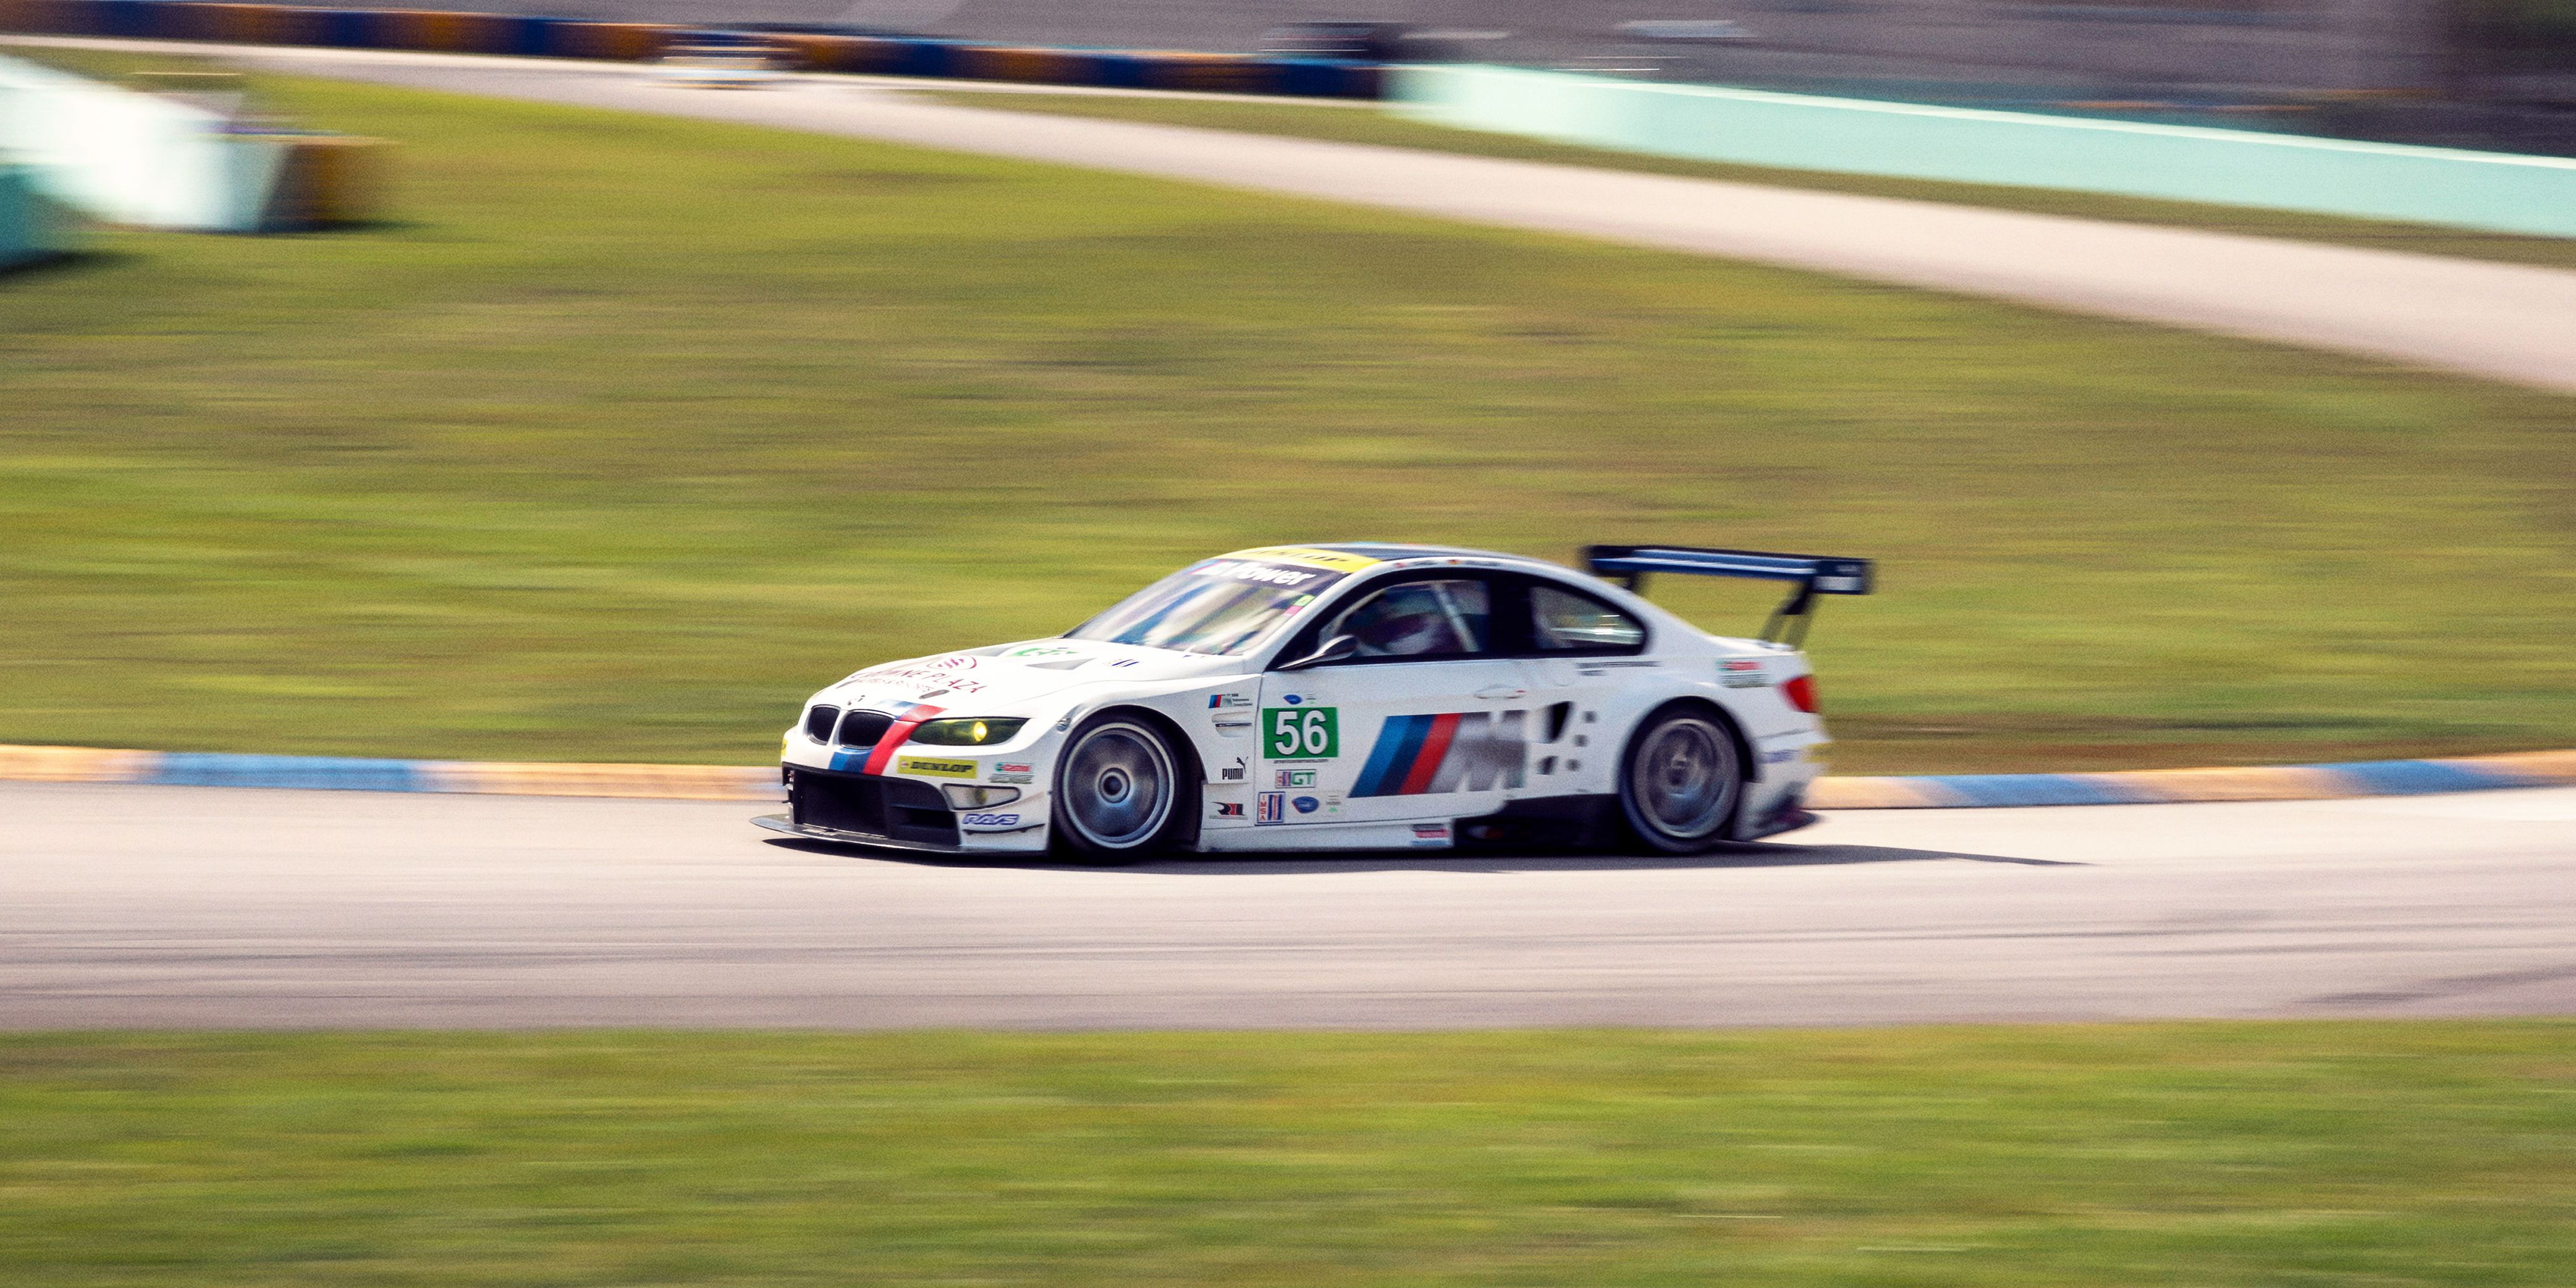 Driving This Legendary BMW M3 Race Car Was a Dream Come True